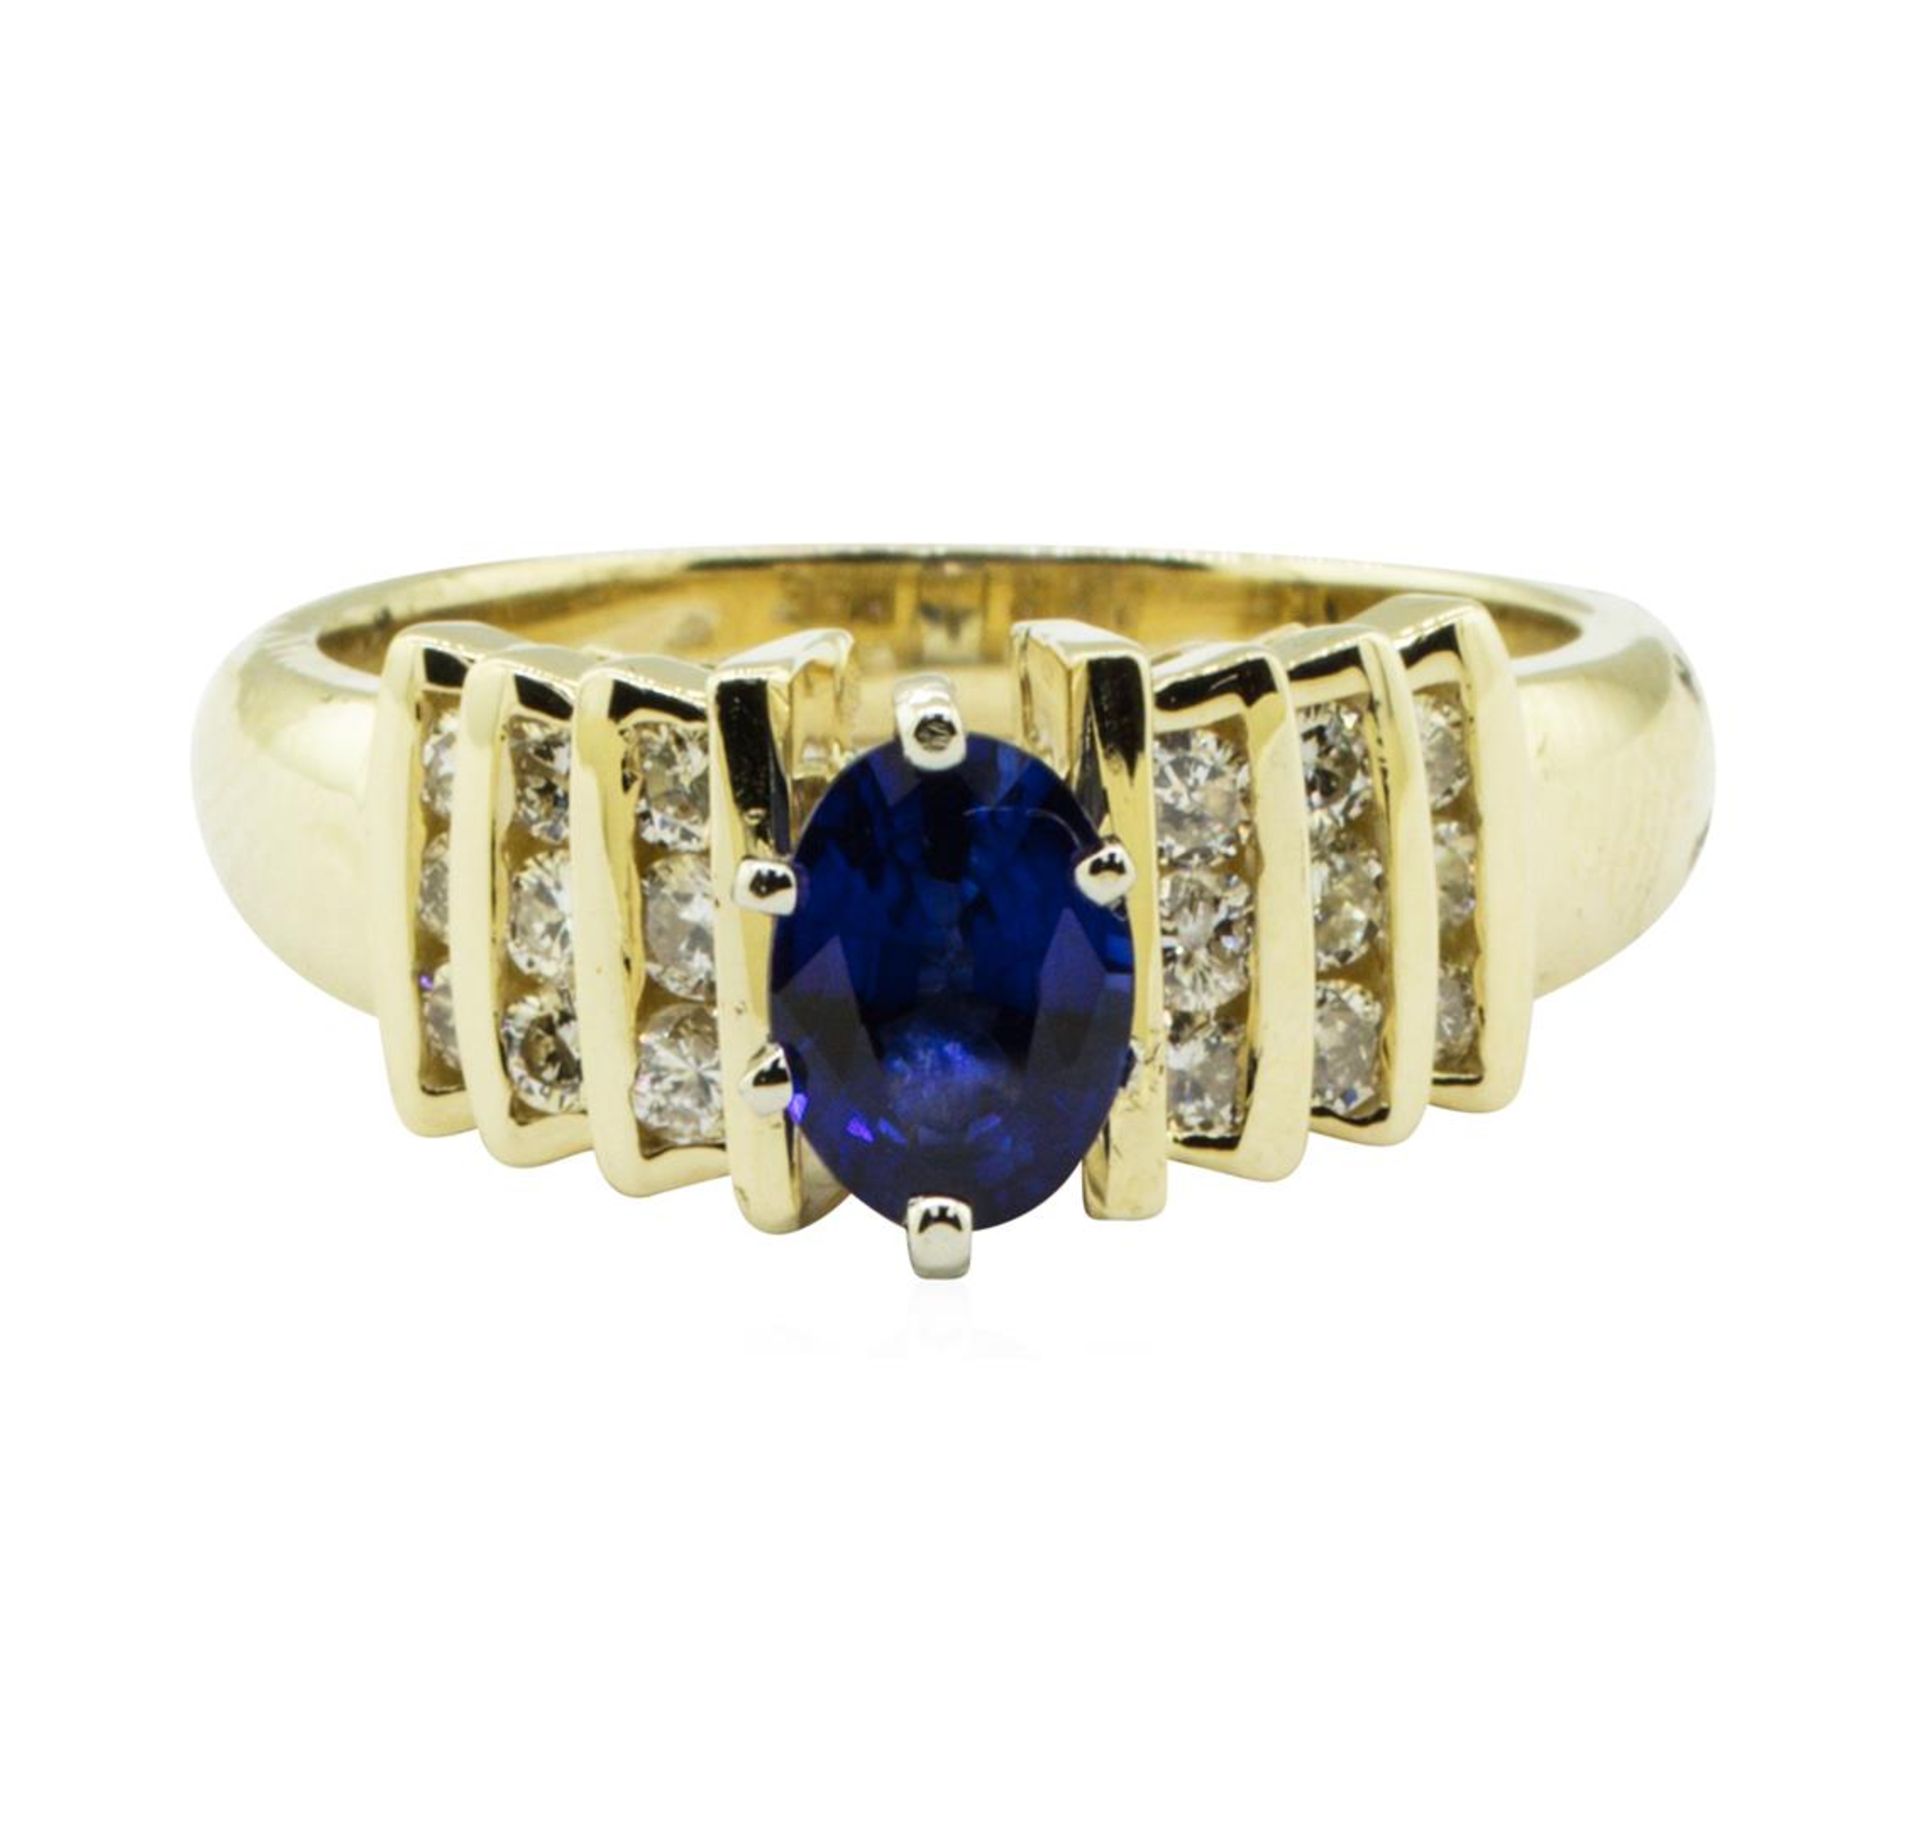 1.30 ctw Oval Brilliant Blue Sapphire And Diamond Ring - 14KT Yellow Gold - Image 2 of 5